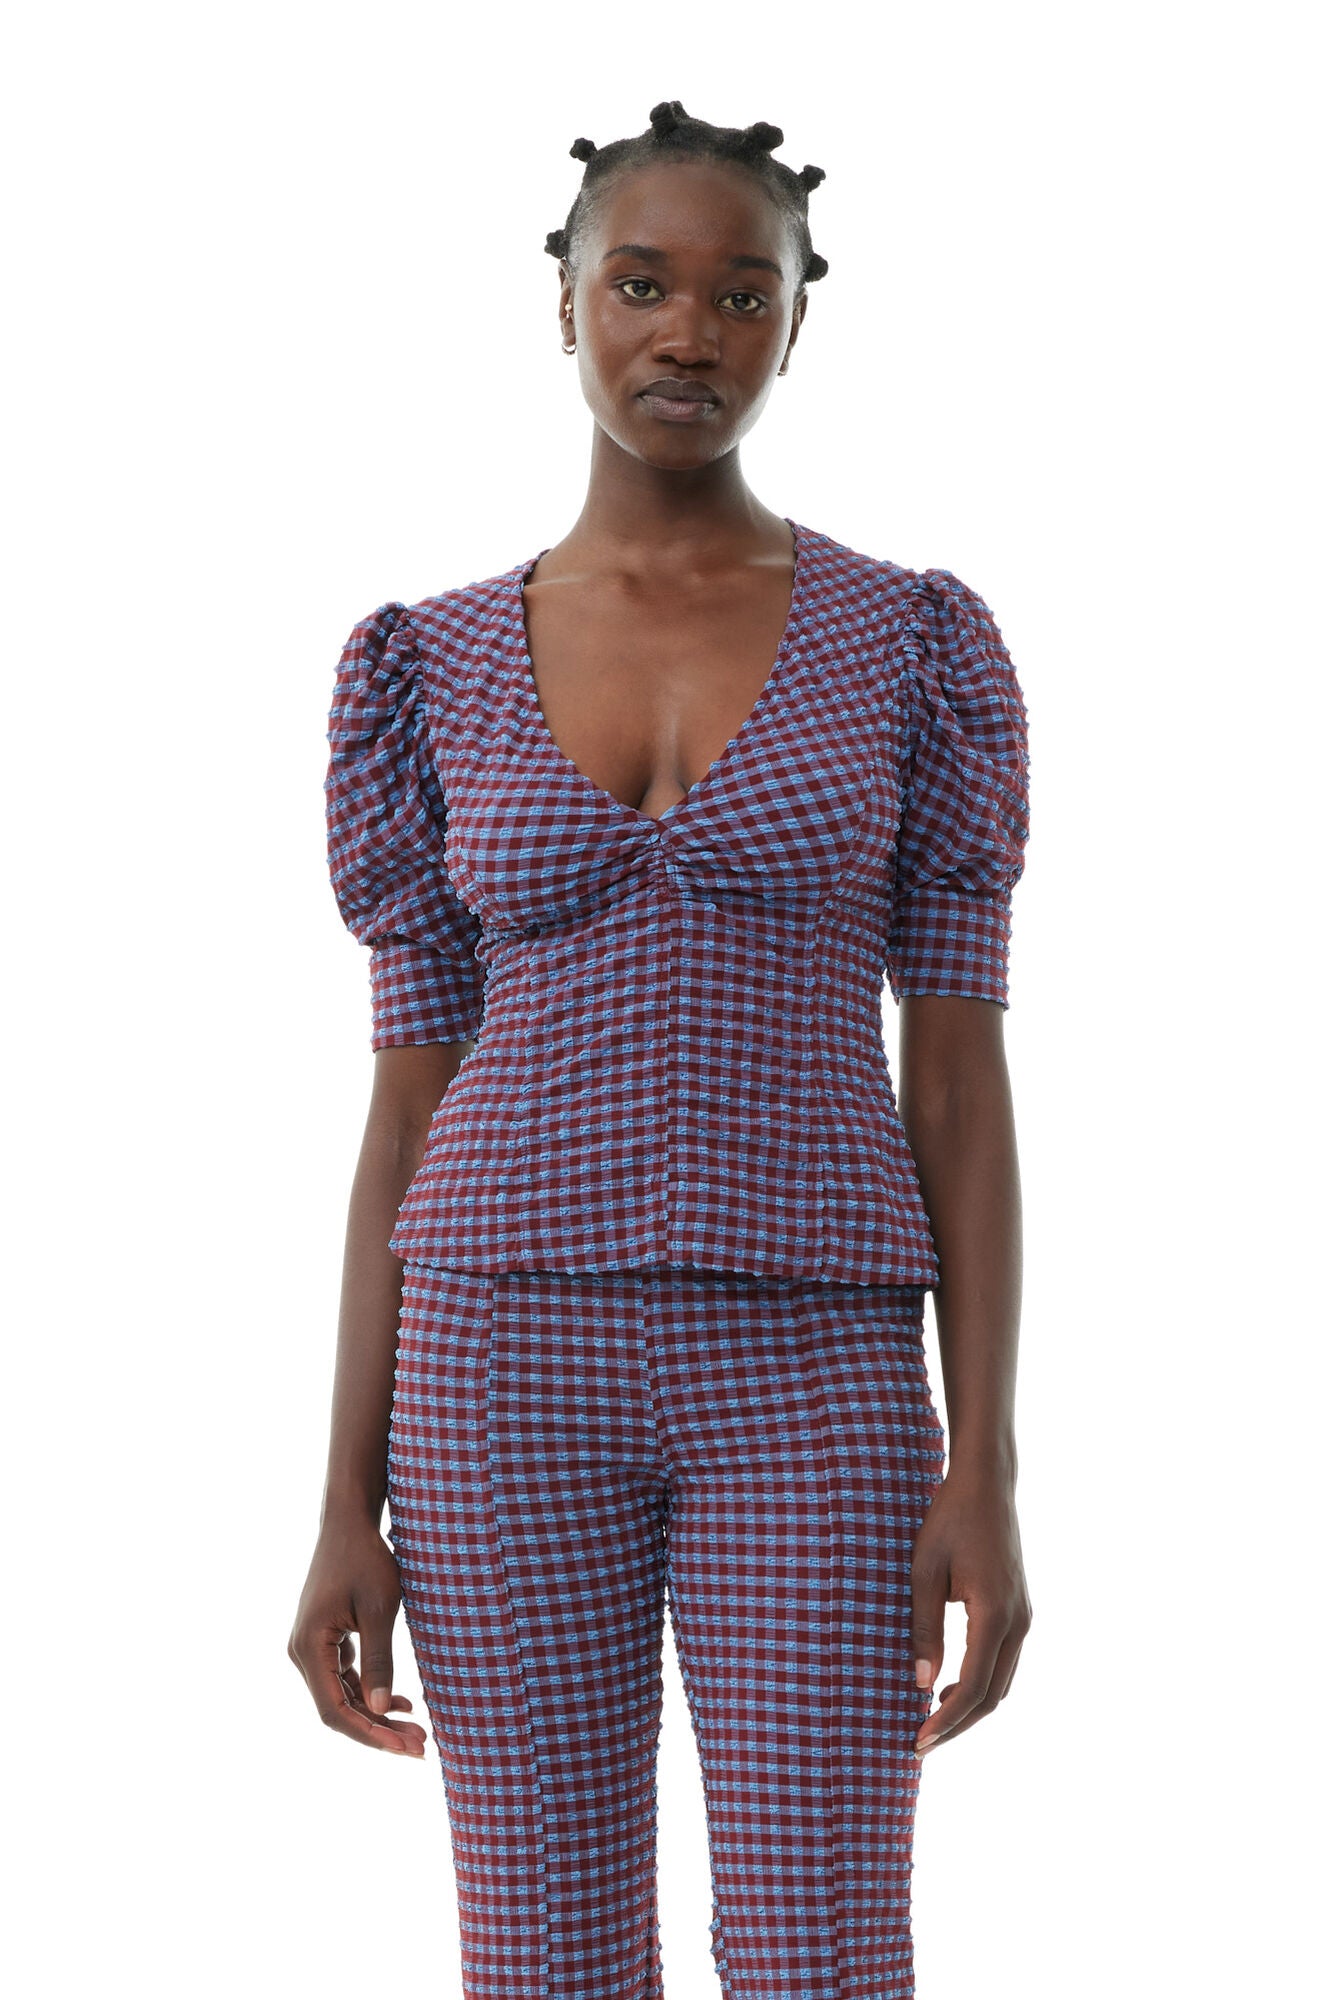 CHECKERED SEERSUCKER V-NECK BLOUSE IN RACING RED - Romi Boutique